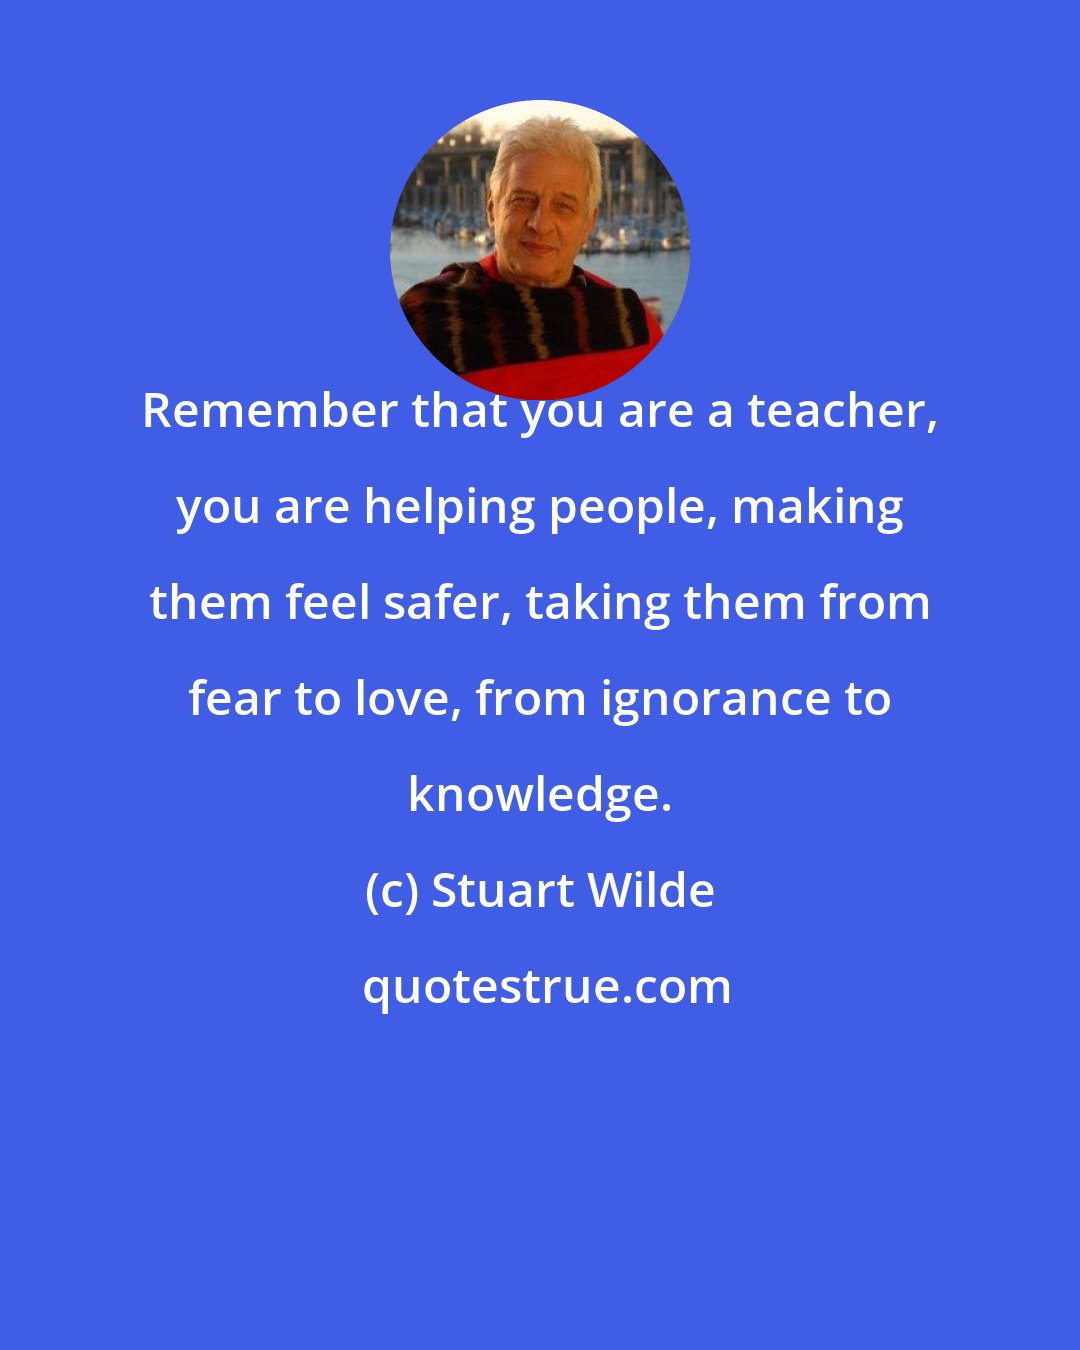 Stuart Wilde: Remember that you are a teacher, you are helping people, making them feel safer, taking them from fear to love, from ignorance to knowledge.